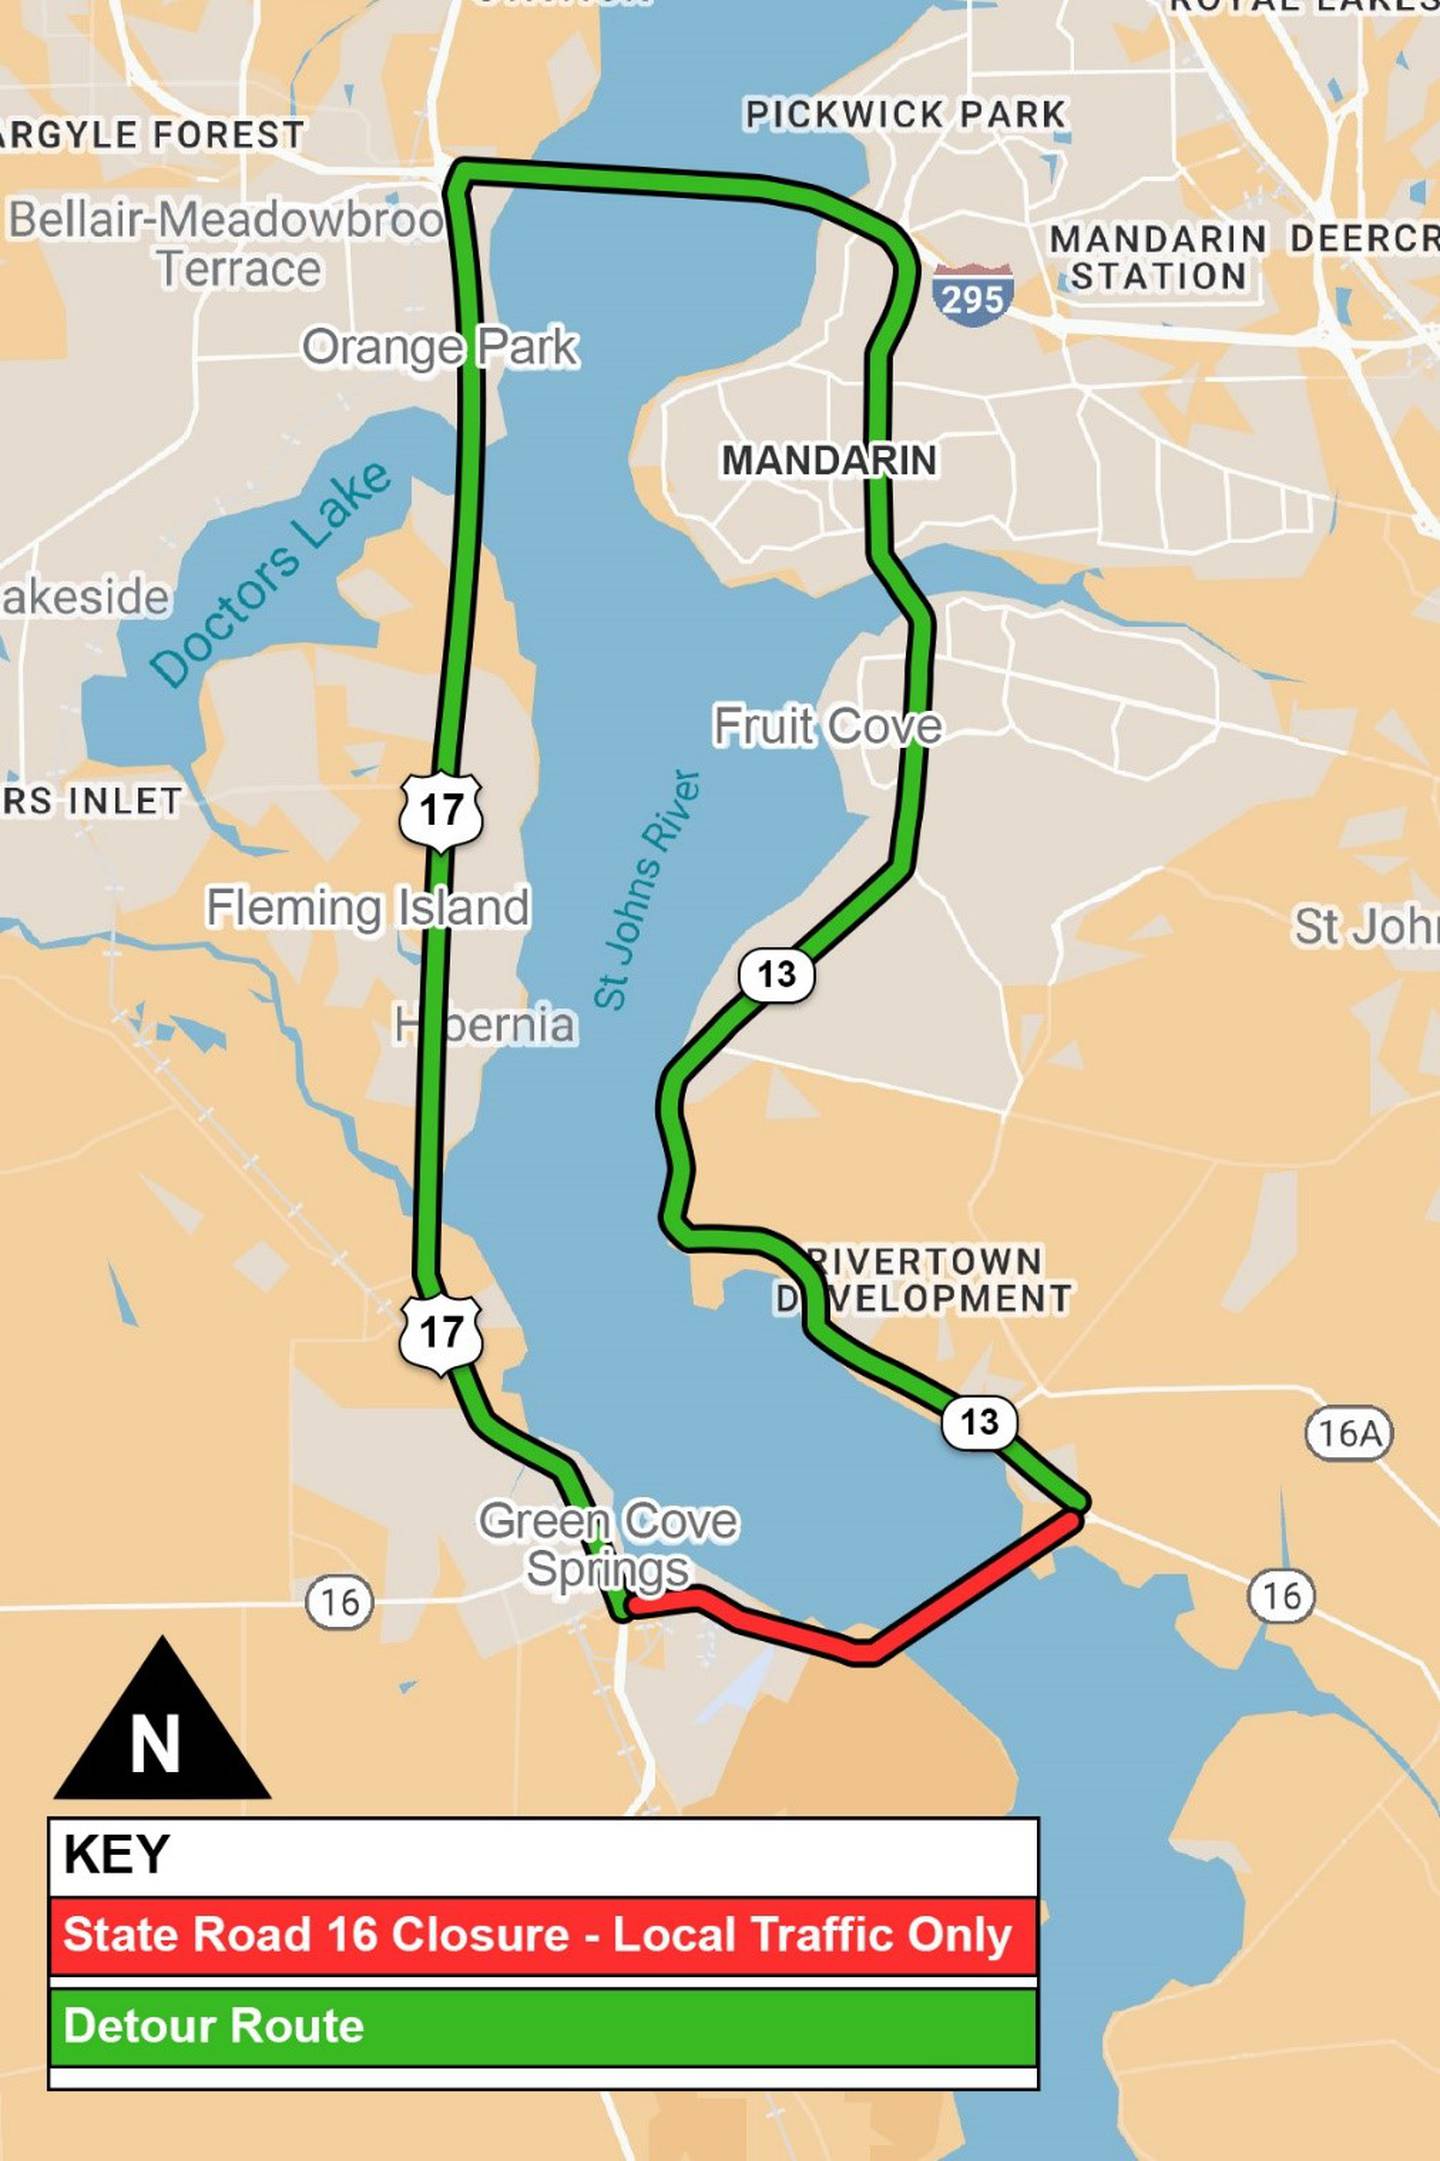 Starting Jan. 26, the Shands Bridge will be closed on three consecutive weekends.